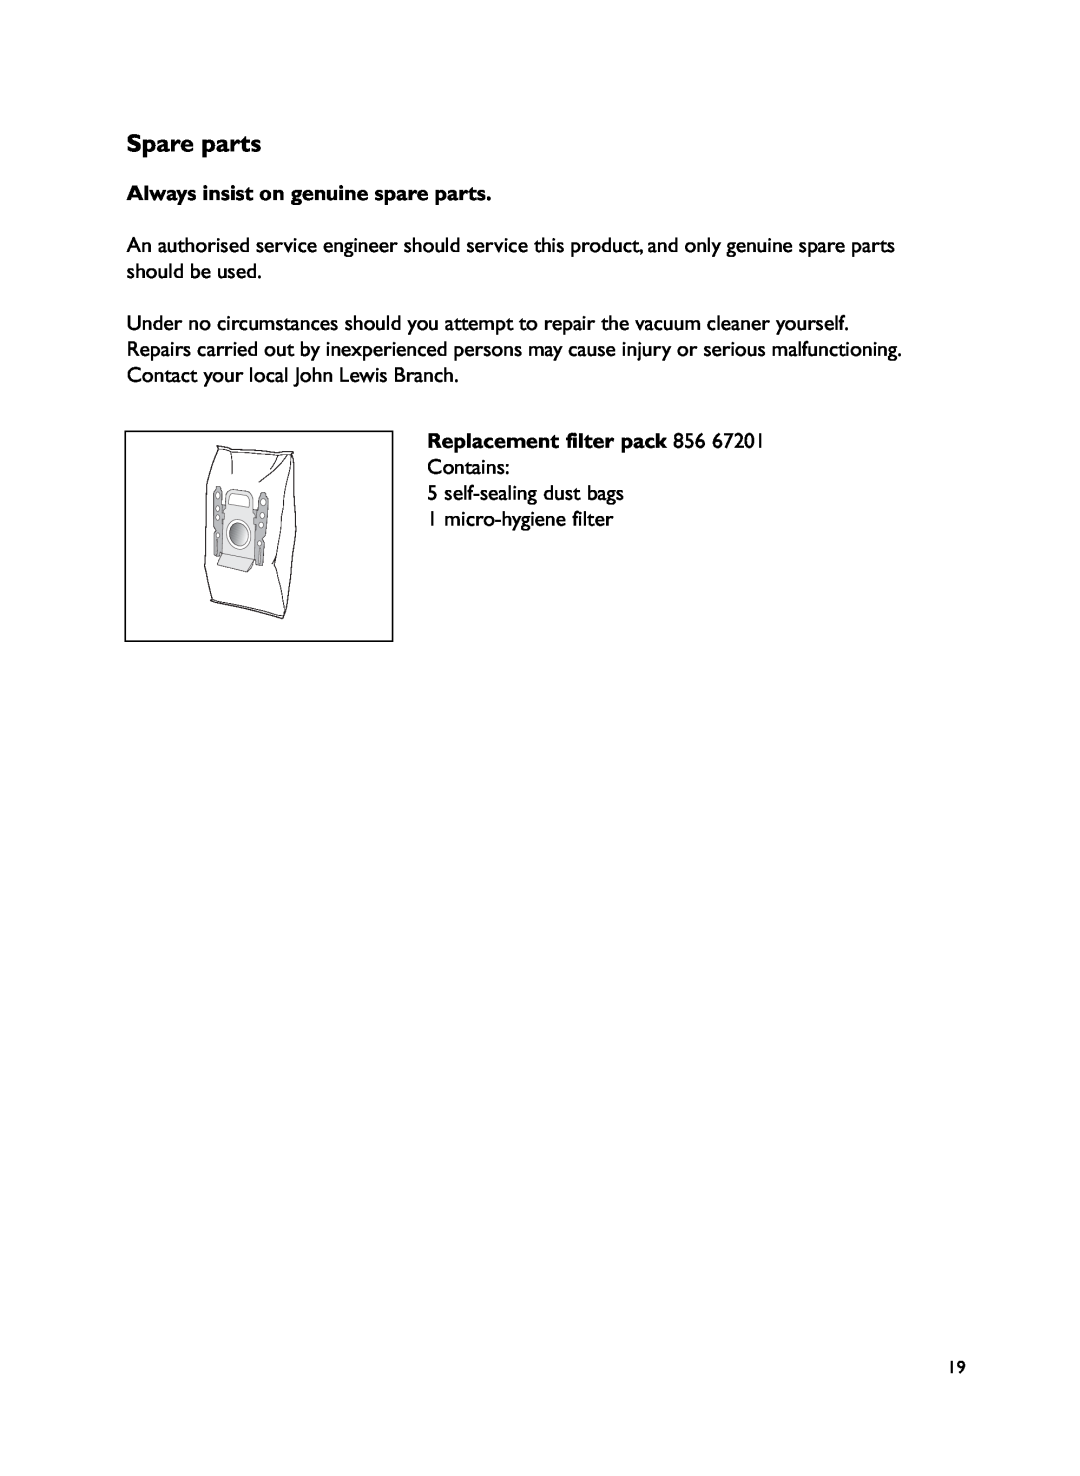 John Lewis JLVS06 instruction manual Spare parts, Always insist on genuine spare parts, Replacement filter pack 